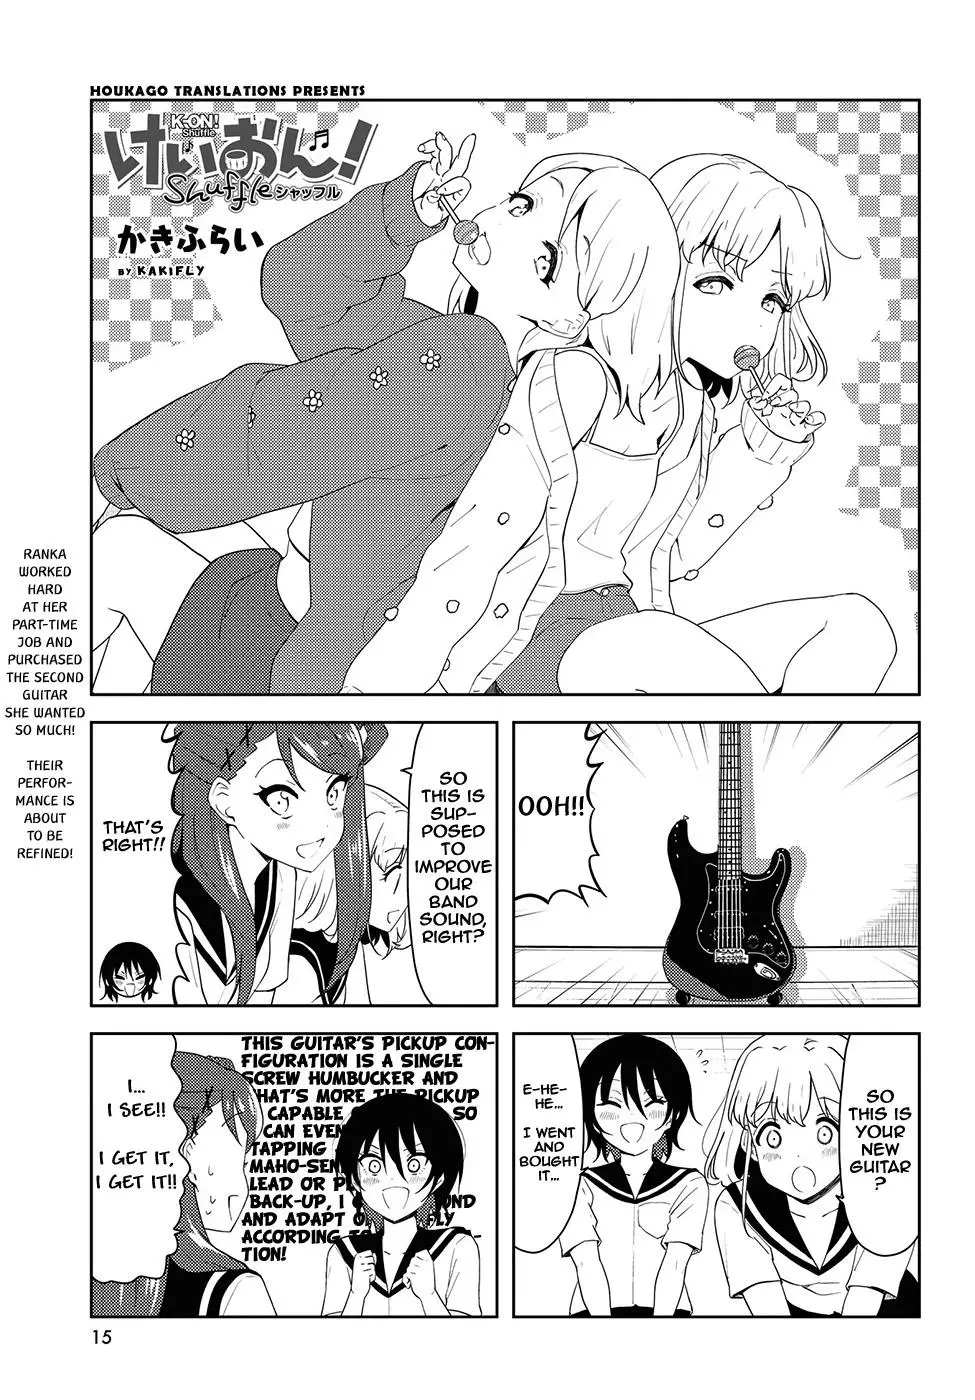 K-On! Shuffle - 46 page 1-c1a70bfe